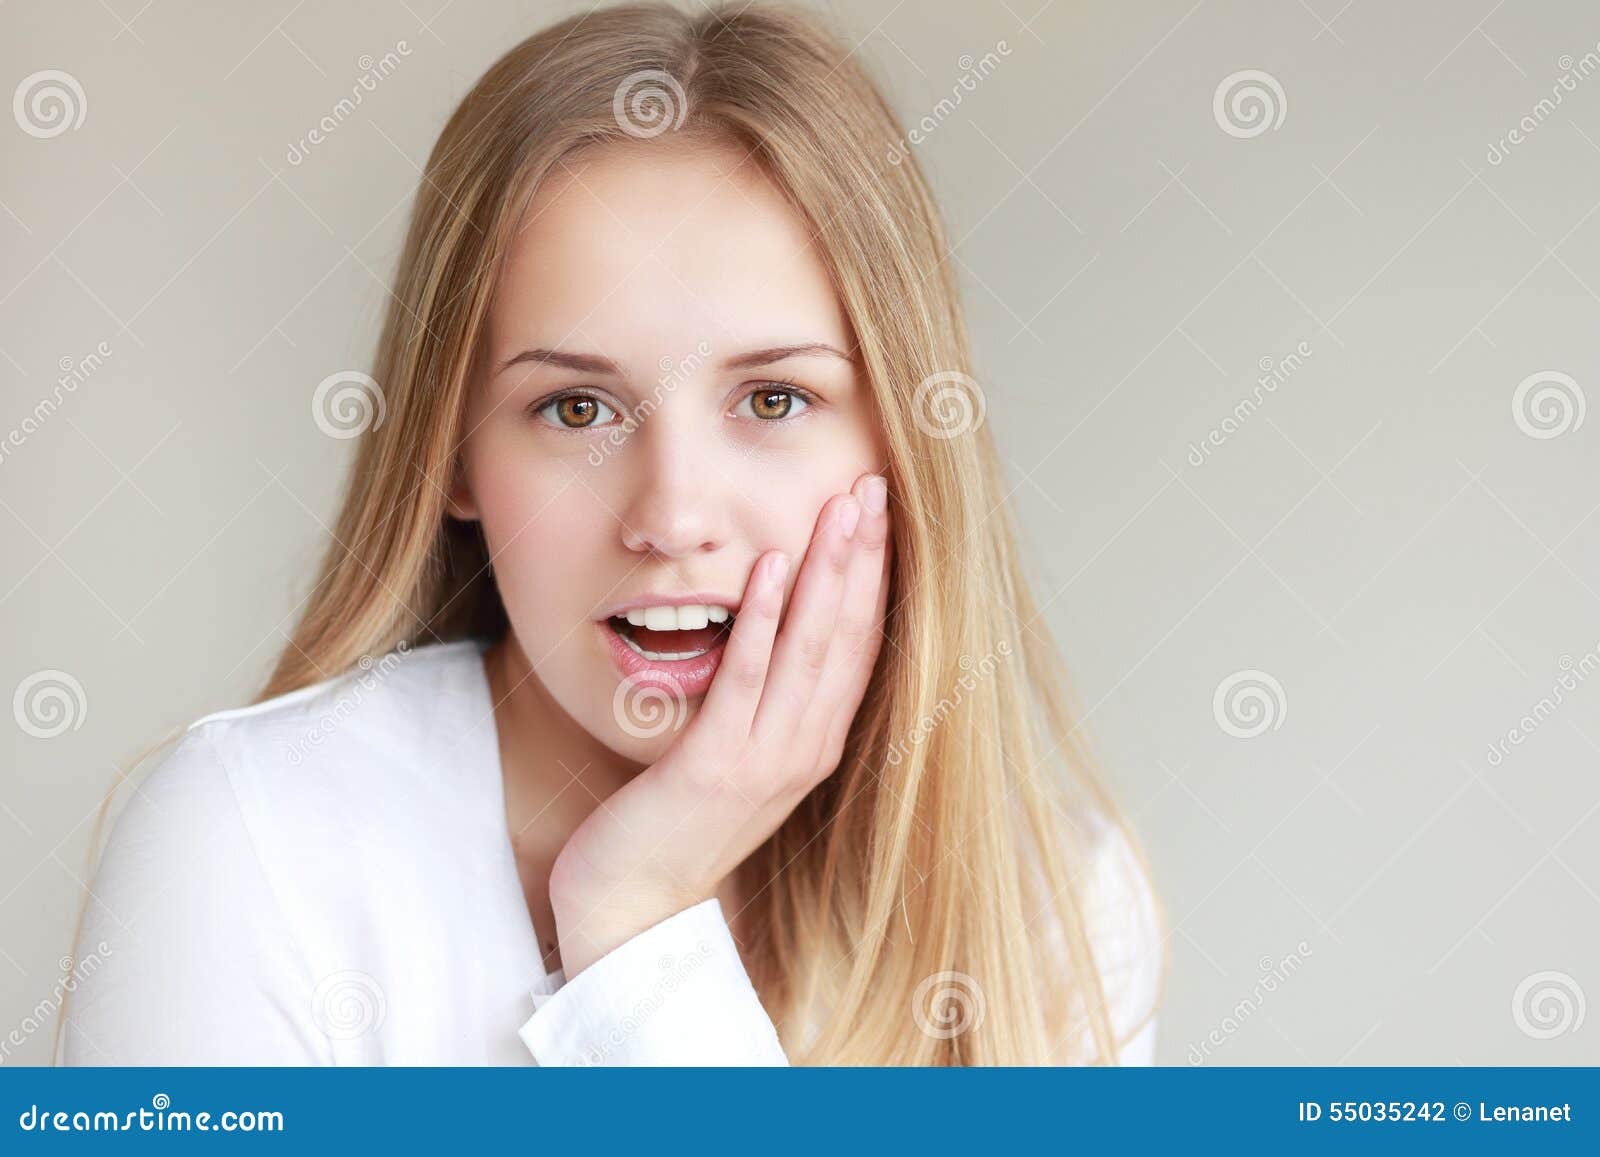 Young teen girl mouth